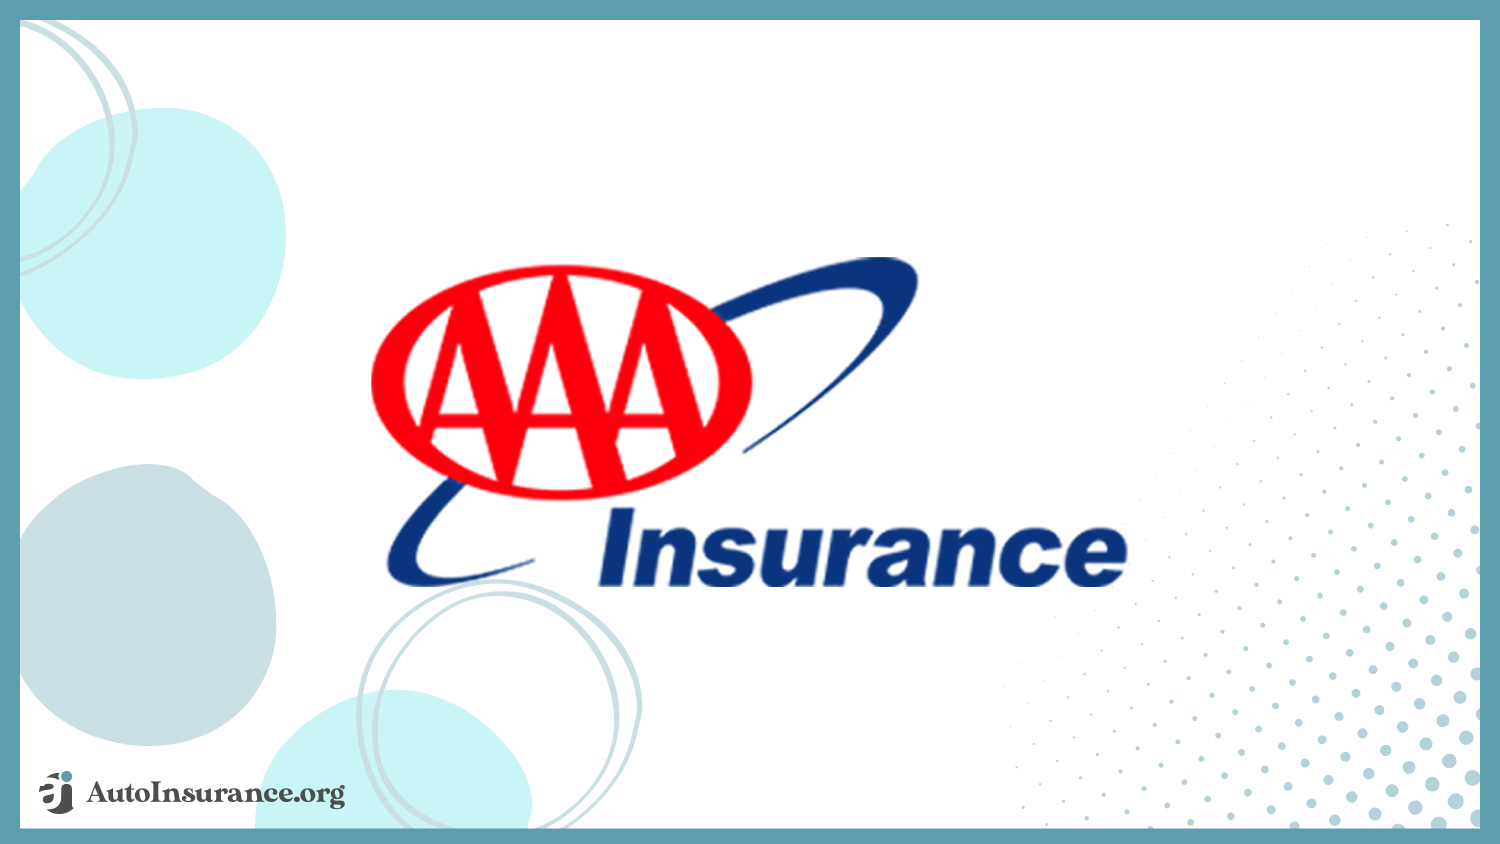 AAA: Best Auto Insurance for Hybrid Vehicles